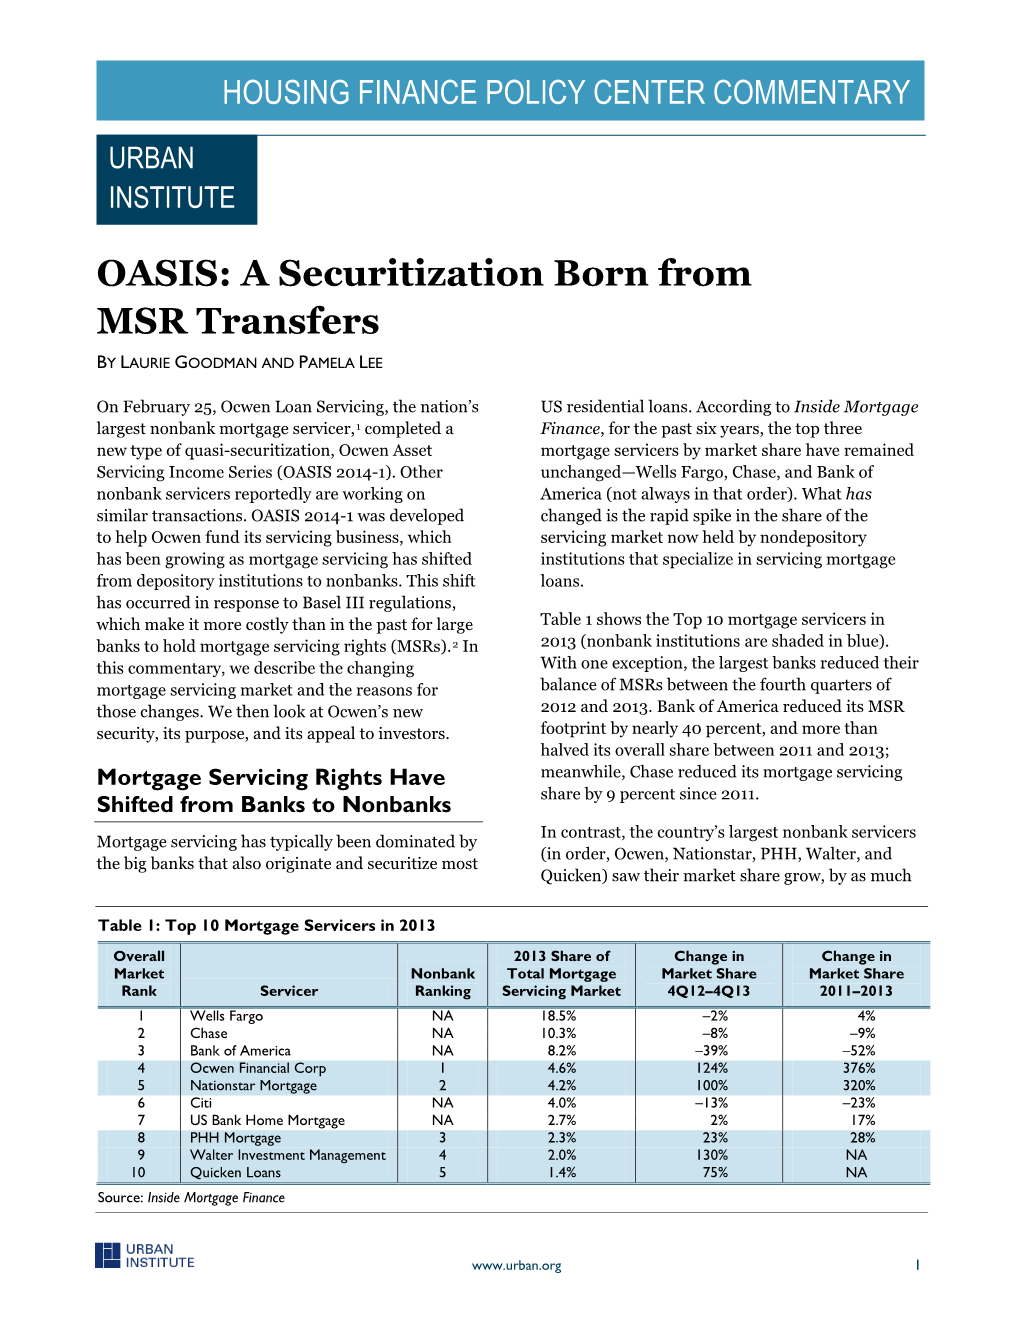 OASIS: a Securitization Born from MSR Transfers by LAURIE GOODMAN and PAMELA LEE